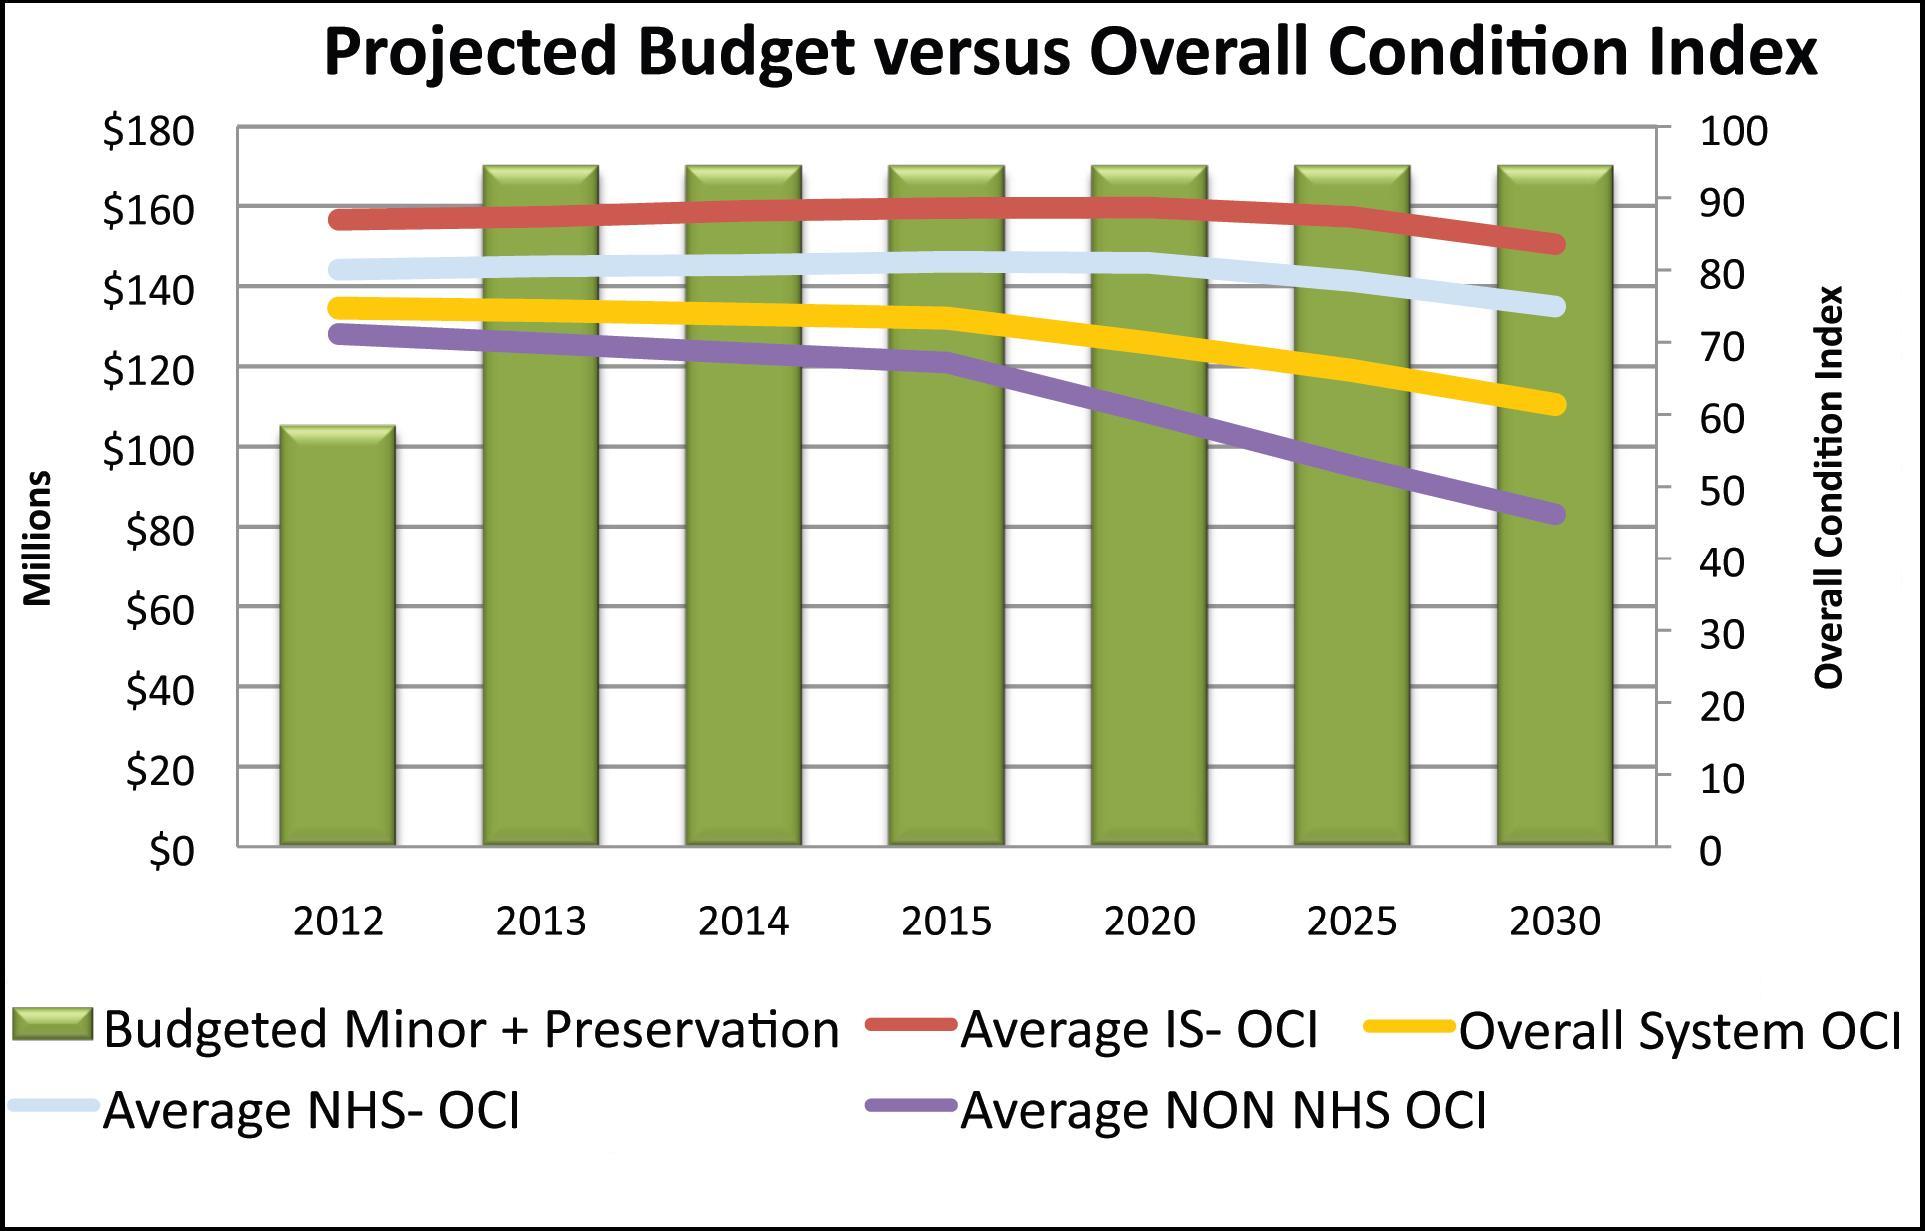 Figure 22 is a bar chart with additional trend lines that illustrate projected budgets compared to the  projected overall pavement condition index.  The overall message of the chart is that if pavement expenditures remain steady at about 170 million dollars from 2013 through 2030, the overall pavement conditions will decline with the greatest decline being on the non-National Highway System routes. The chart begins in 2012 with a projected budget of just over 100 million dollars for minor pavement preservation.  The budget increases in 2013 to about 170 million dollars and remains at that level through 2030.  The trendlines illustrate the projected effect upon four conditions.  The trendline for the average Interstate Highway System Overall Condition Index shows that the index begins in 2012 at about 89  and stays about 90 through 2025 when it gradually declines to about 85 in 2030.  Another line depicts the average Overall Condition Index for the National Highway System. The NHS OCI starts at about 82 and remains at that level through 2025 when it declines in 2030 to about 78.   The trendline for the Overall Condition Index for the entire highway network stays steady at about 75 from 2012 through 2015 when it begins to decline. By 2030, the overall highway network OCI is about 60.  For routes not on the National Highway System the decline in conditions is more significant.  The non-NHS routes have an OCI of about 70 in 2012 and that falls rapidly after 2015. By 2030 the non-NHS routes have an OCI of about 45.